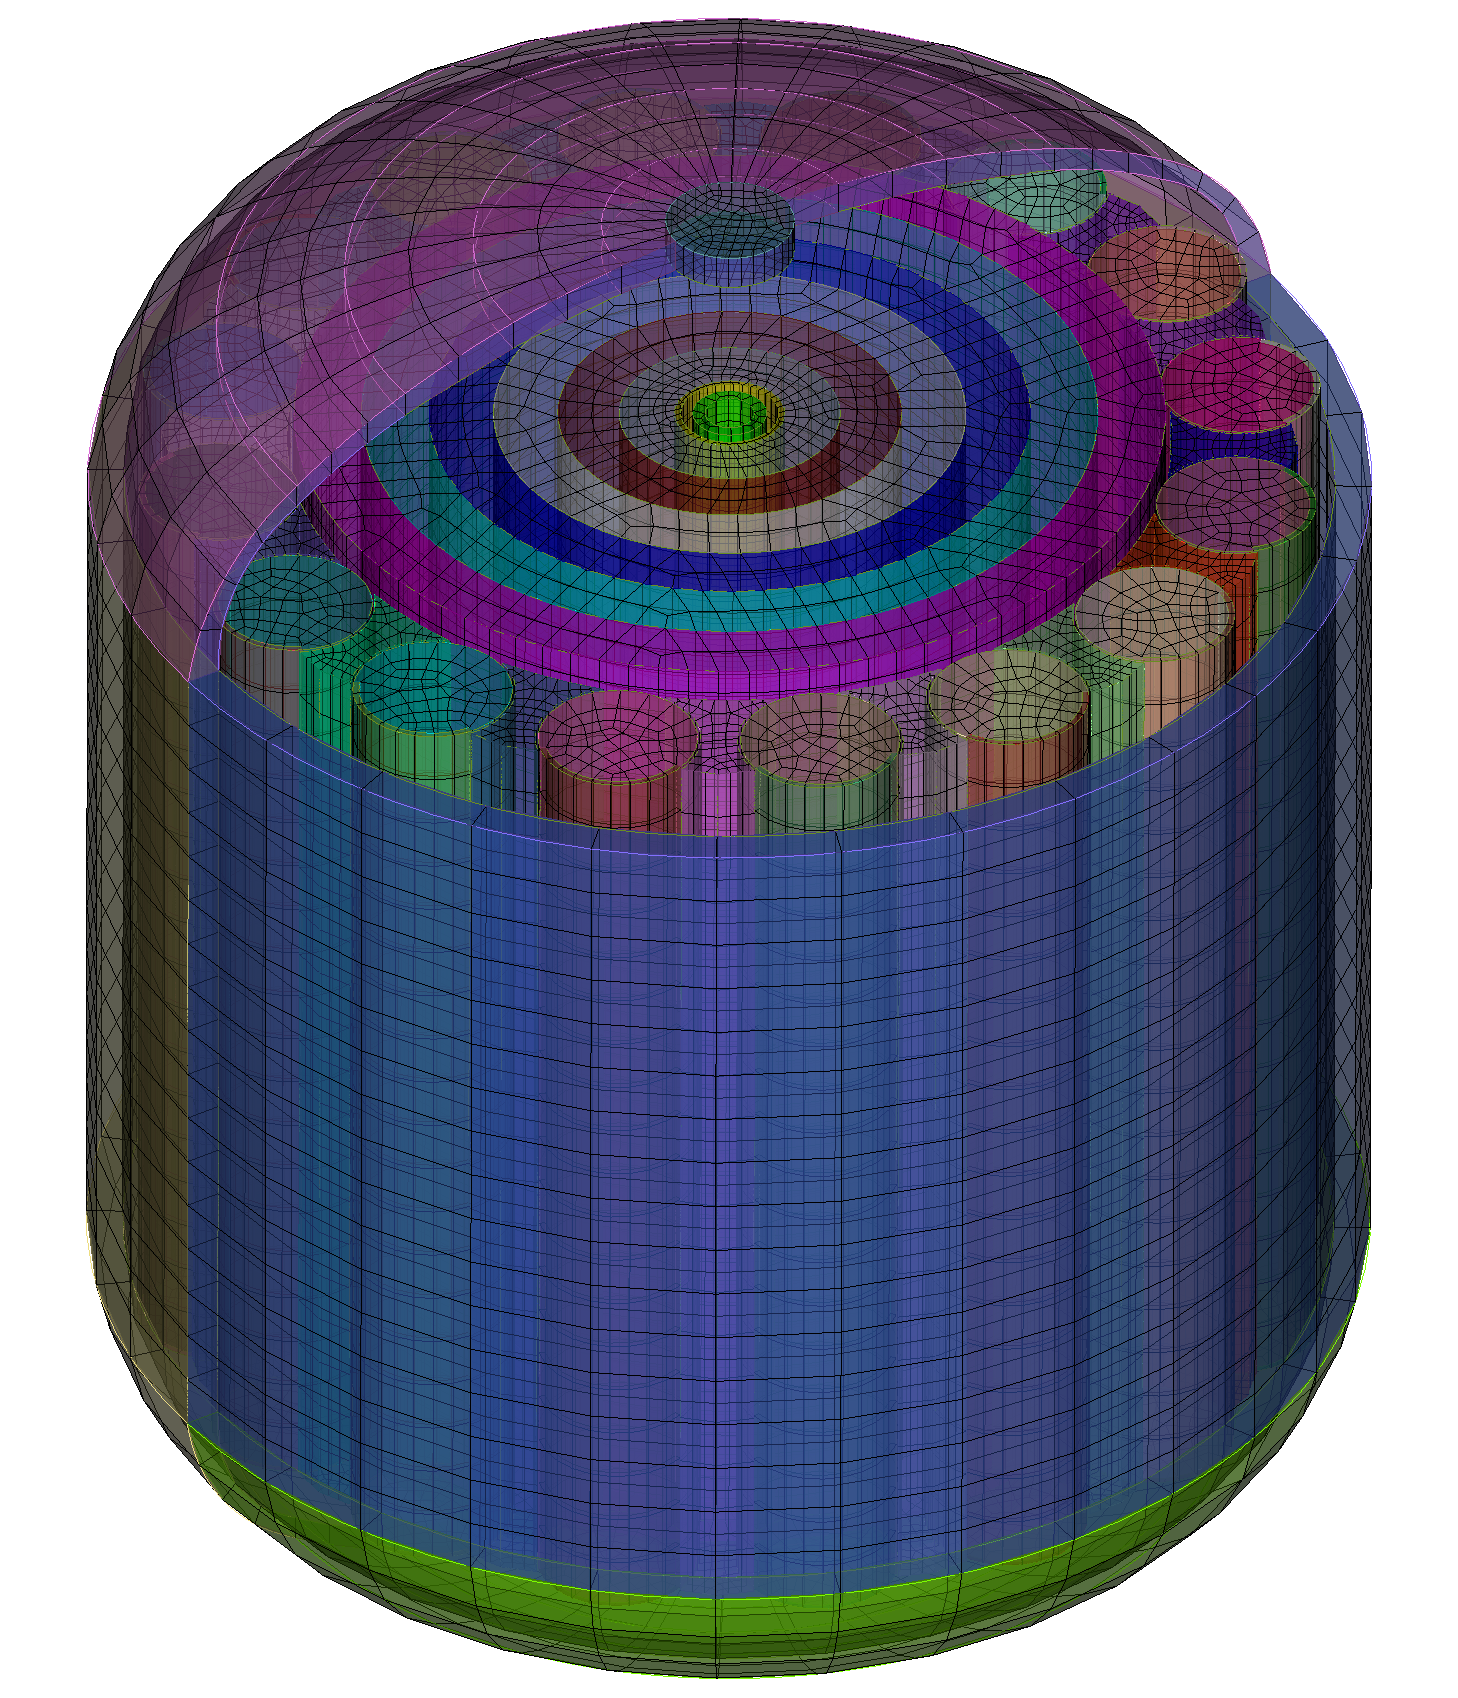 Figure 2. Programmatically generated core mesh modeled in Coreform Cubit for thermohydraulic modeling in MOOSE. This is a medium-fidelity model of the Radiant reactor core with some computational simplifications in the geometry. Using the Python API in Coreform Cubit, this fully procedurally generated mesh takes only a few seconds to update and remesh, ideal for rapid simulation iterations in MOOSE.